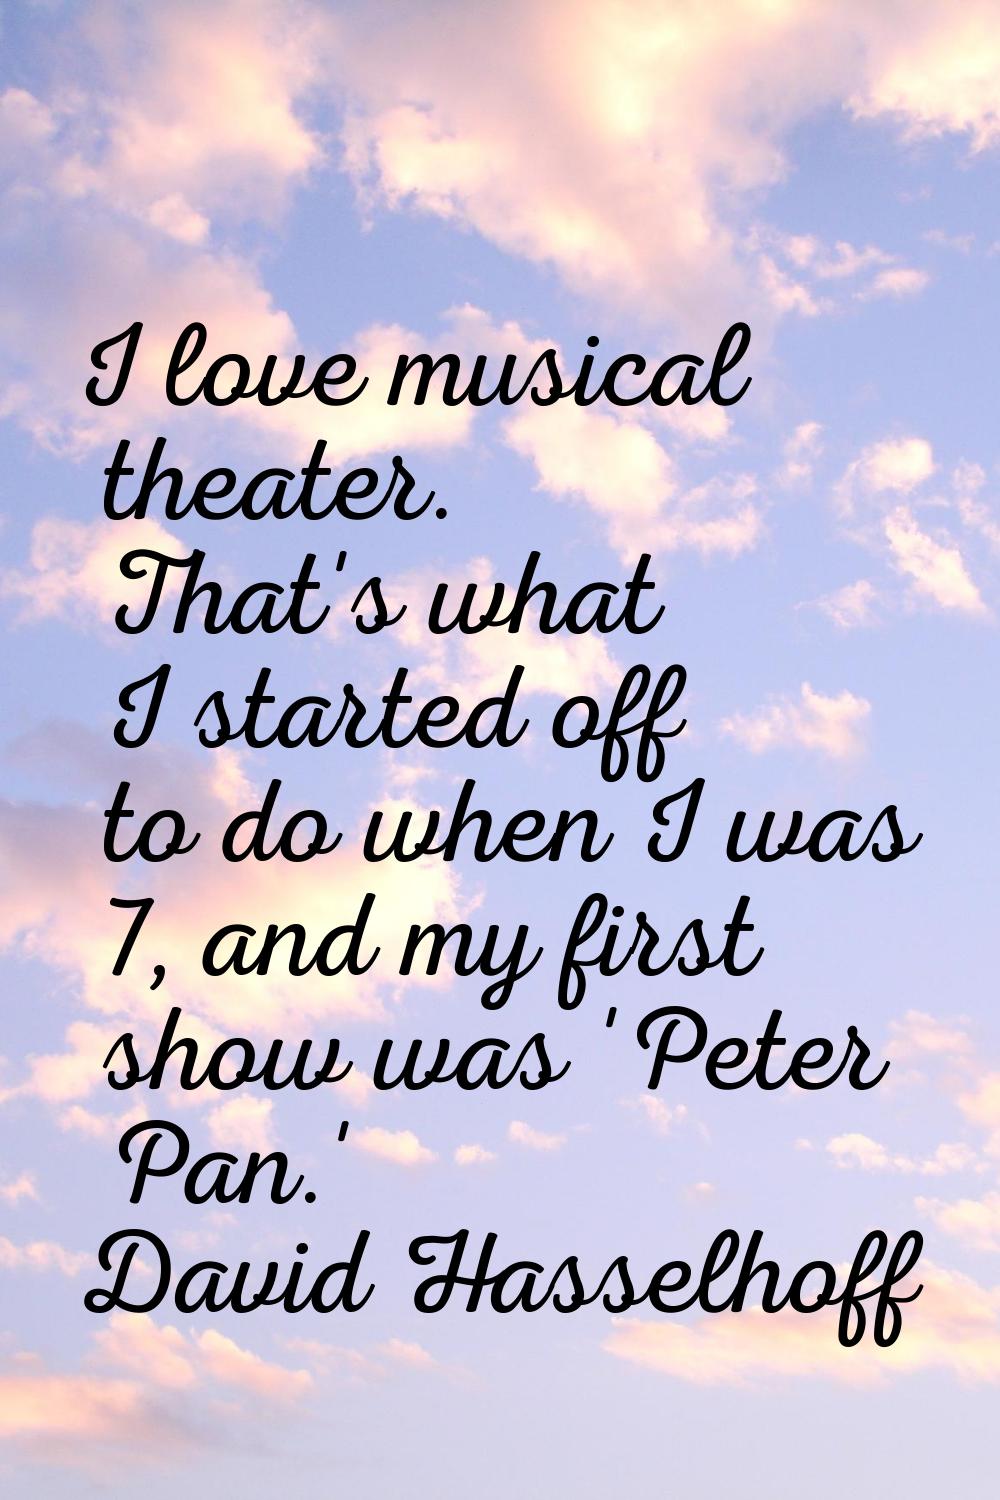 I love musical theater. That's what I started off to do when I was 7, and my first show was 'Peter 